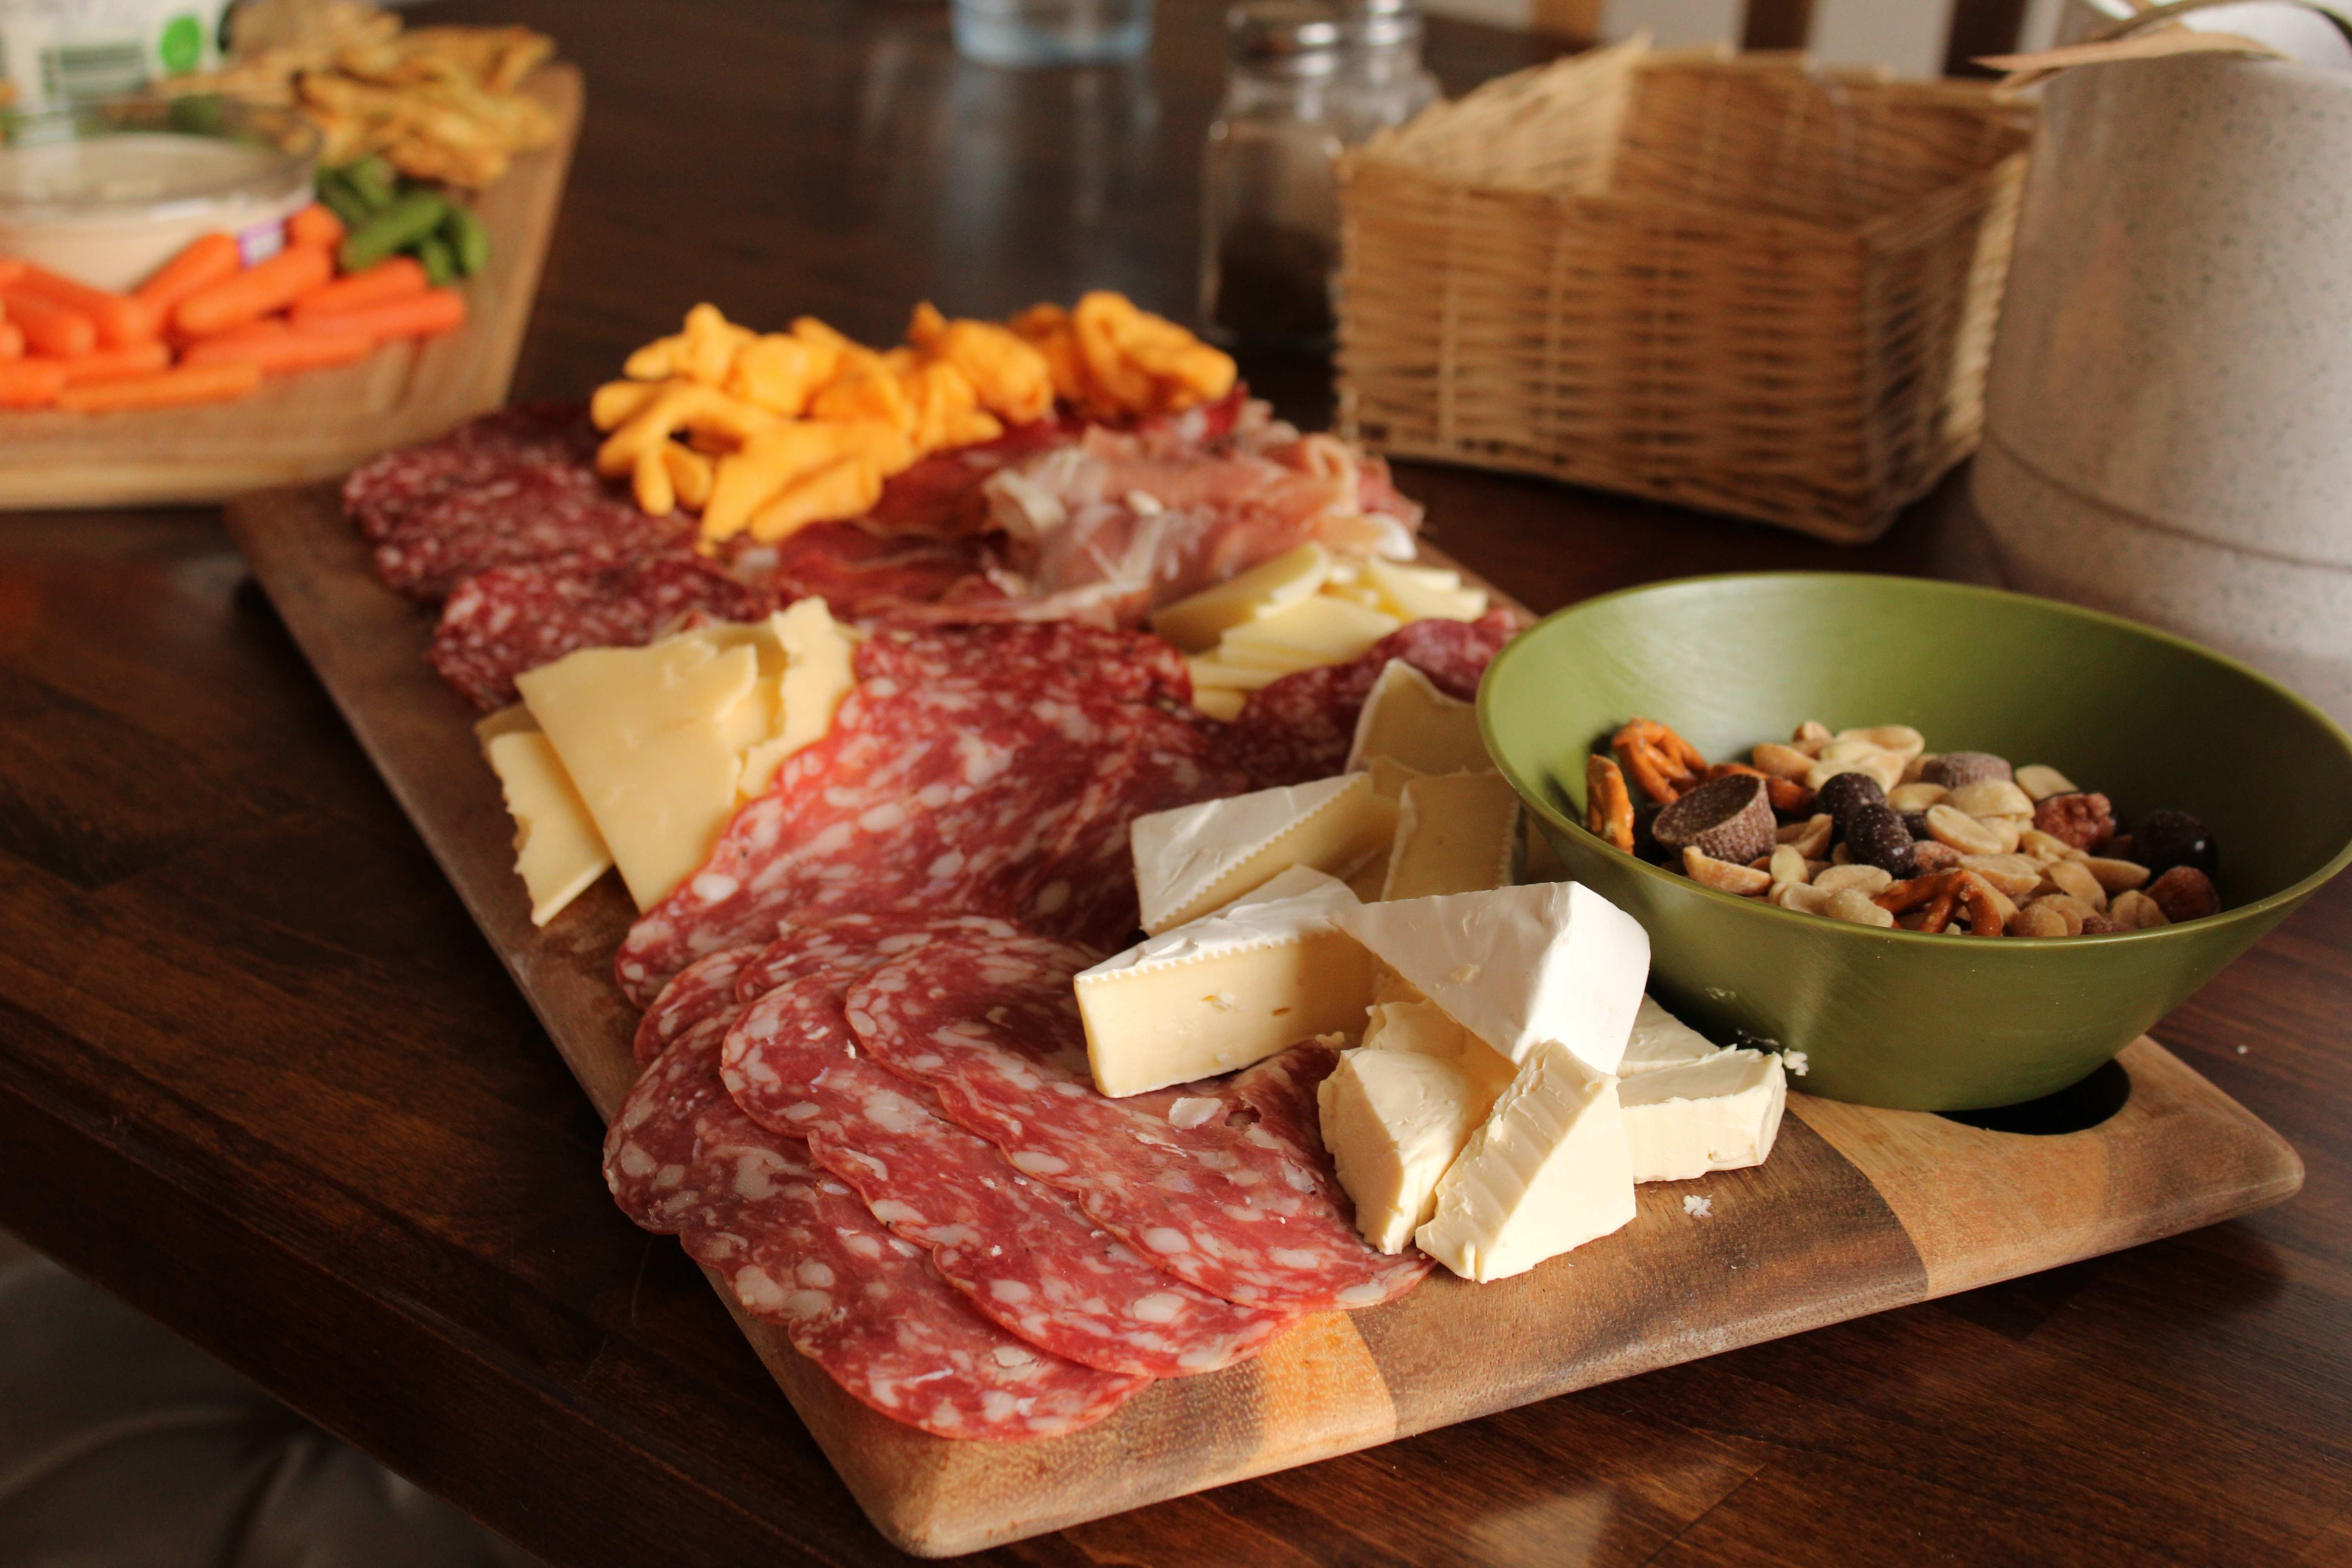 A delicious meat and cheese board is laid out for guests on Thanksgiving.